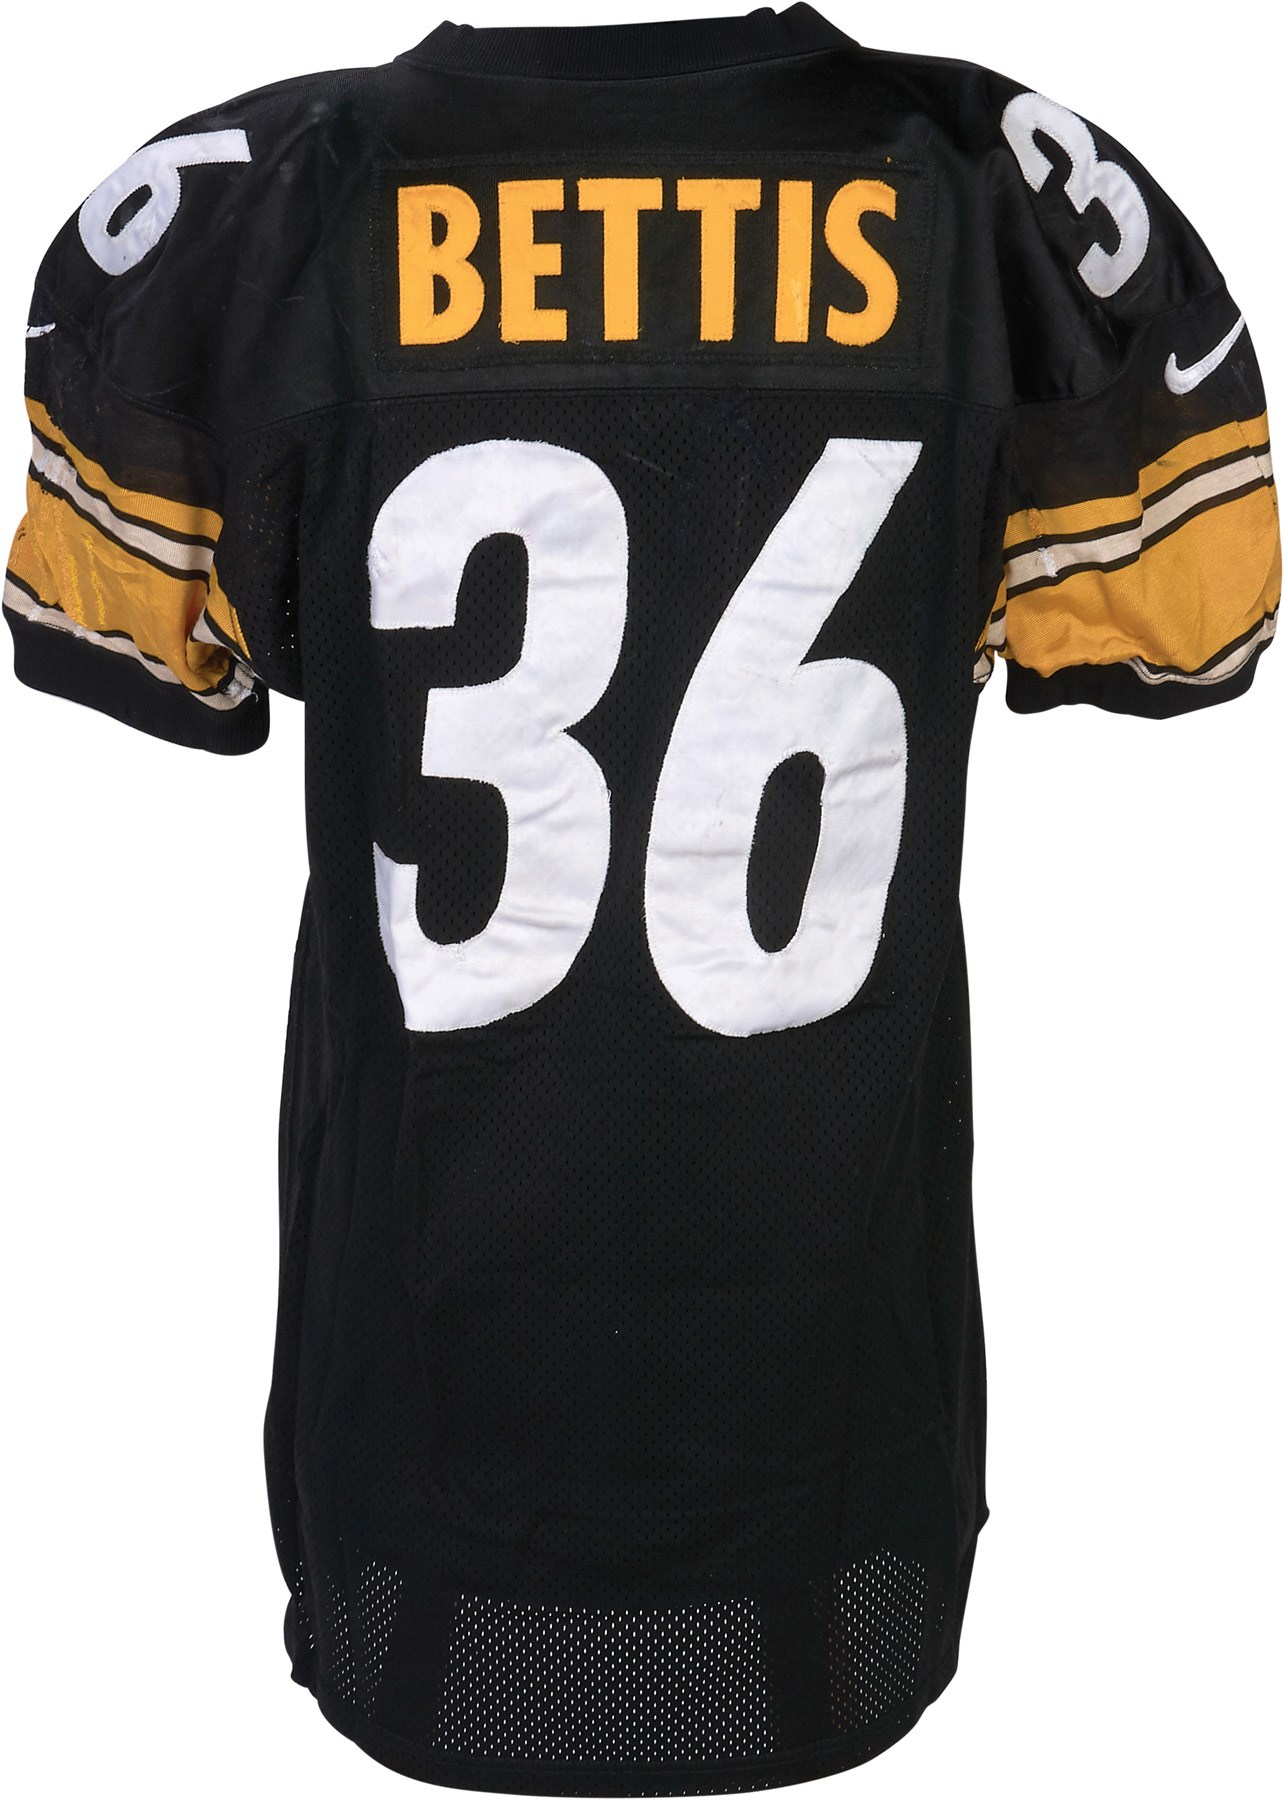 - 1997 Season Jerome Bettis Pittsburgh Steelers Game Worn Jersey - 646yds & 3TD's (Photo-Matched to 6 Games)